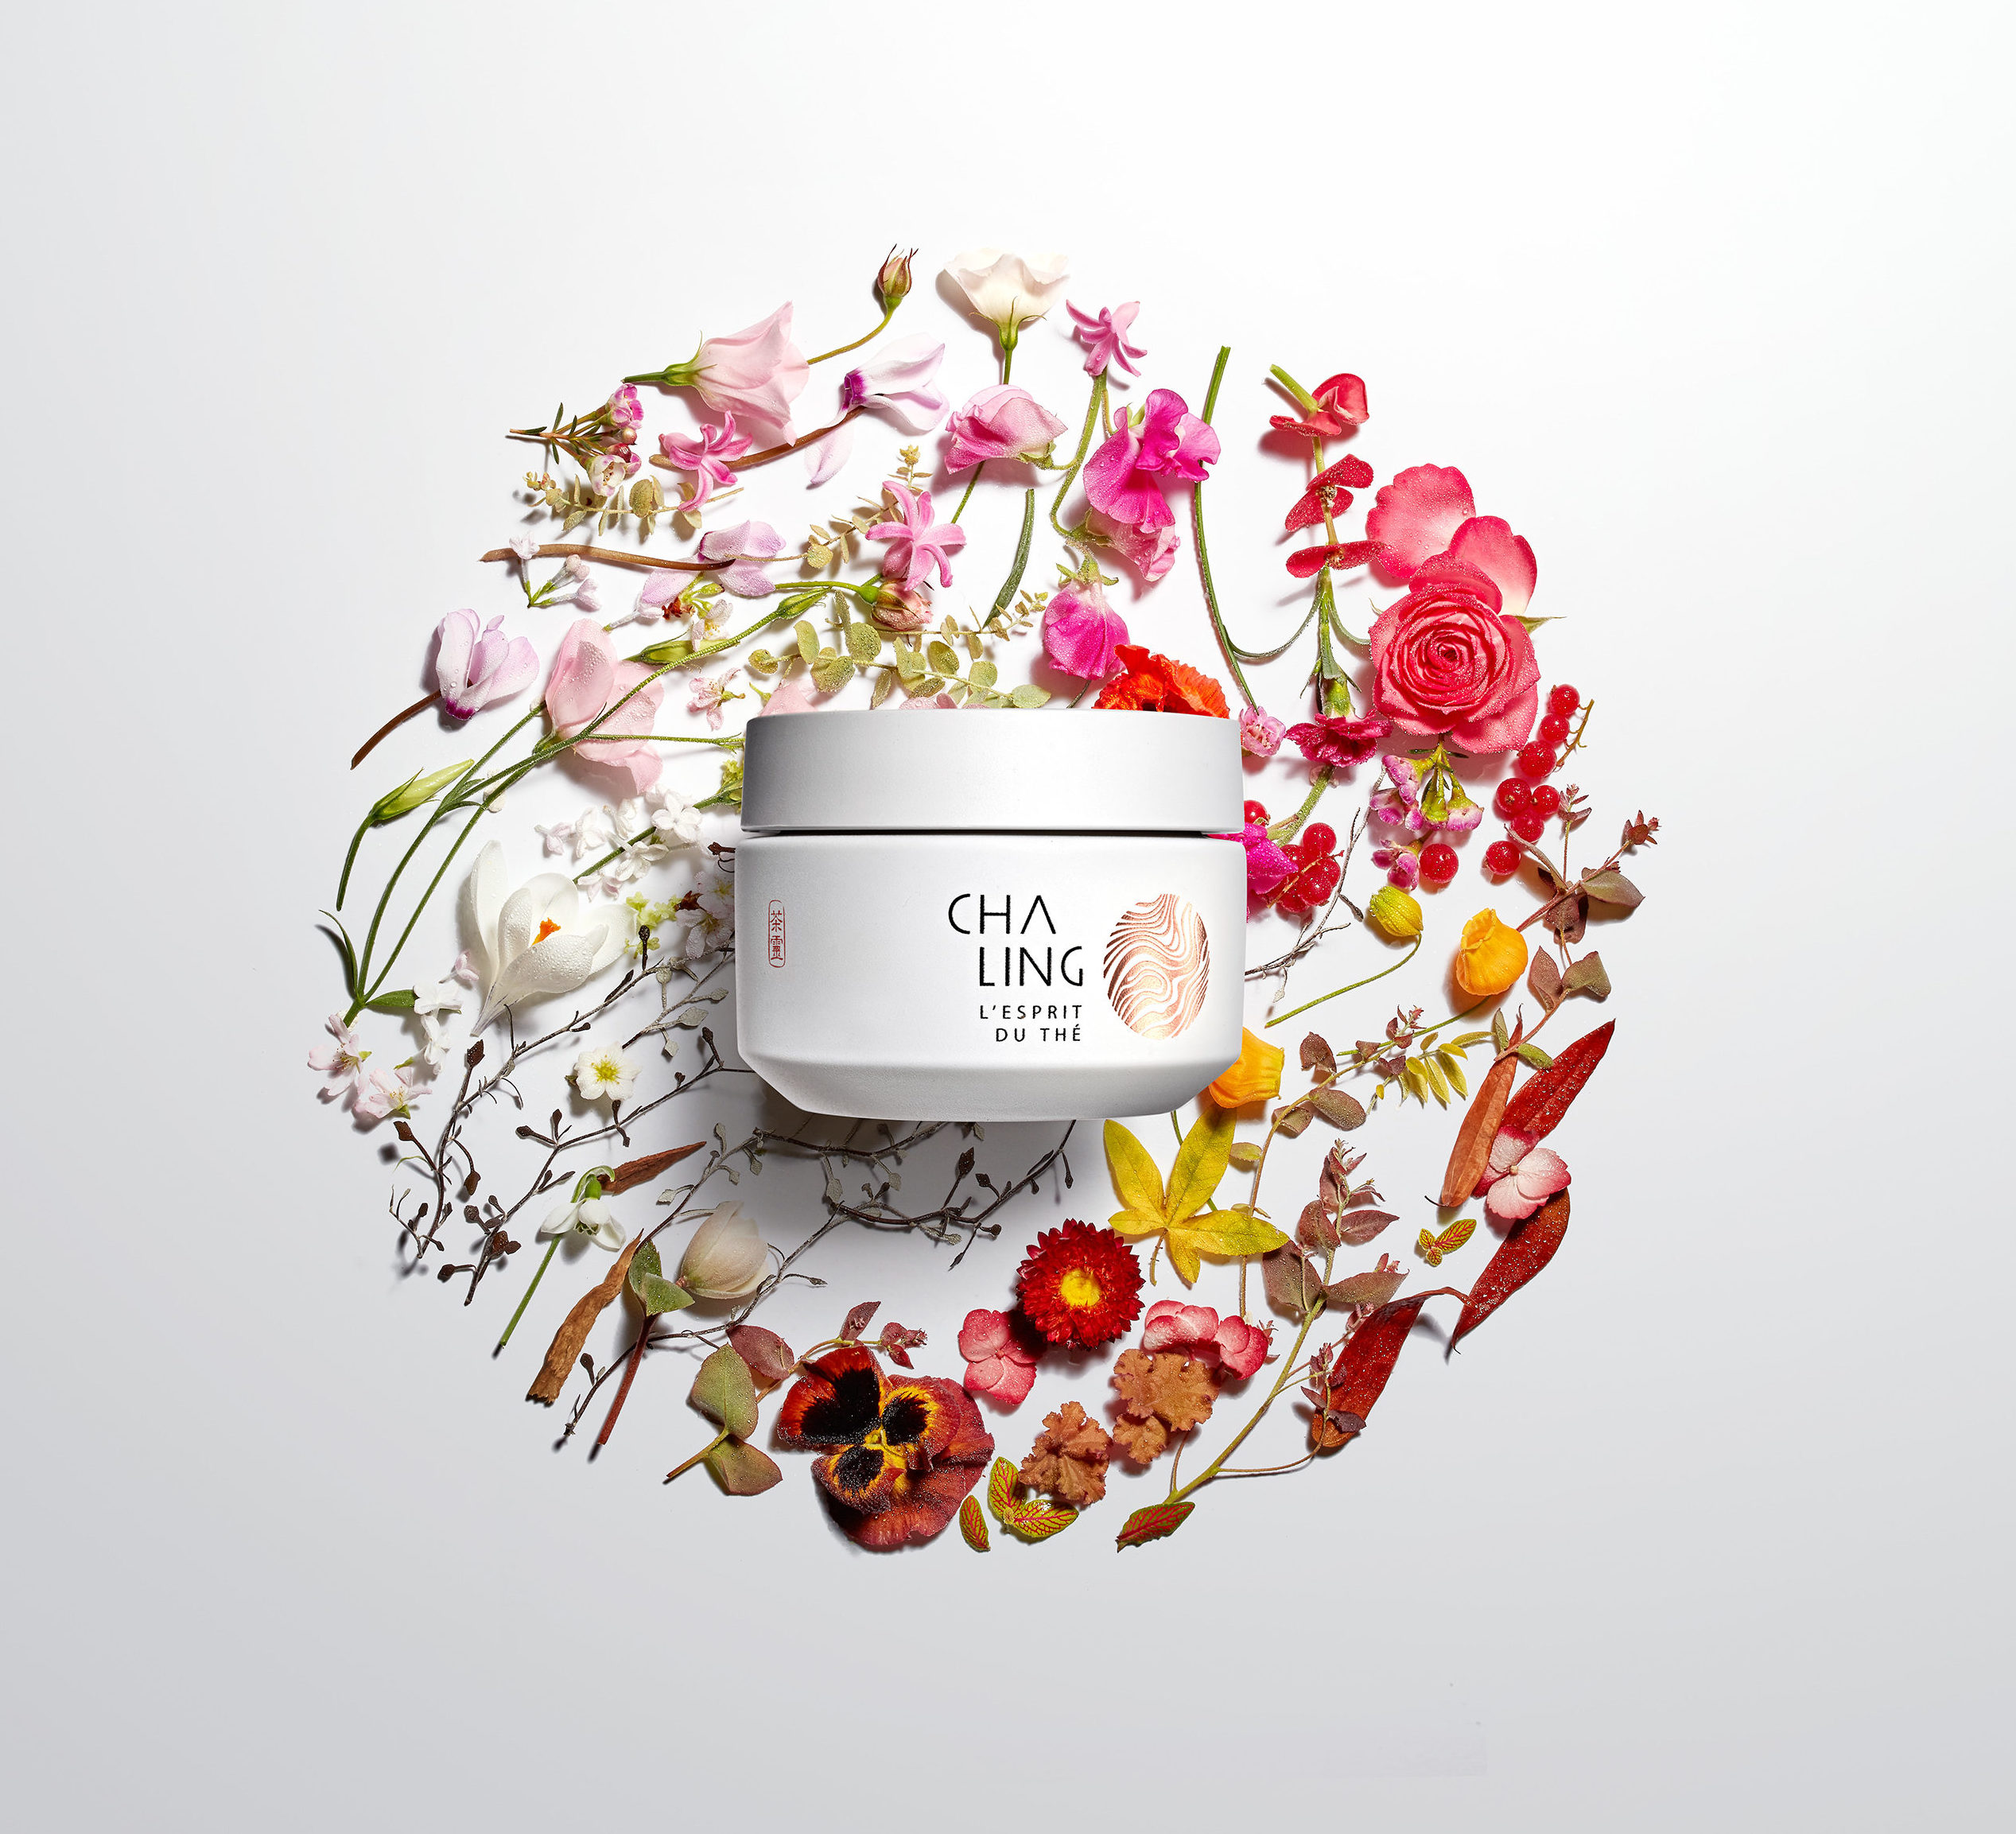 Cha Ling Spring Mask Travel Review 2020